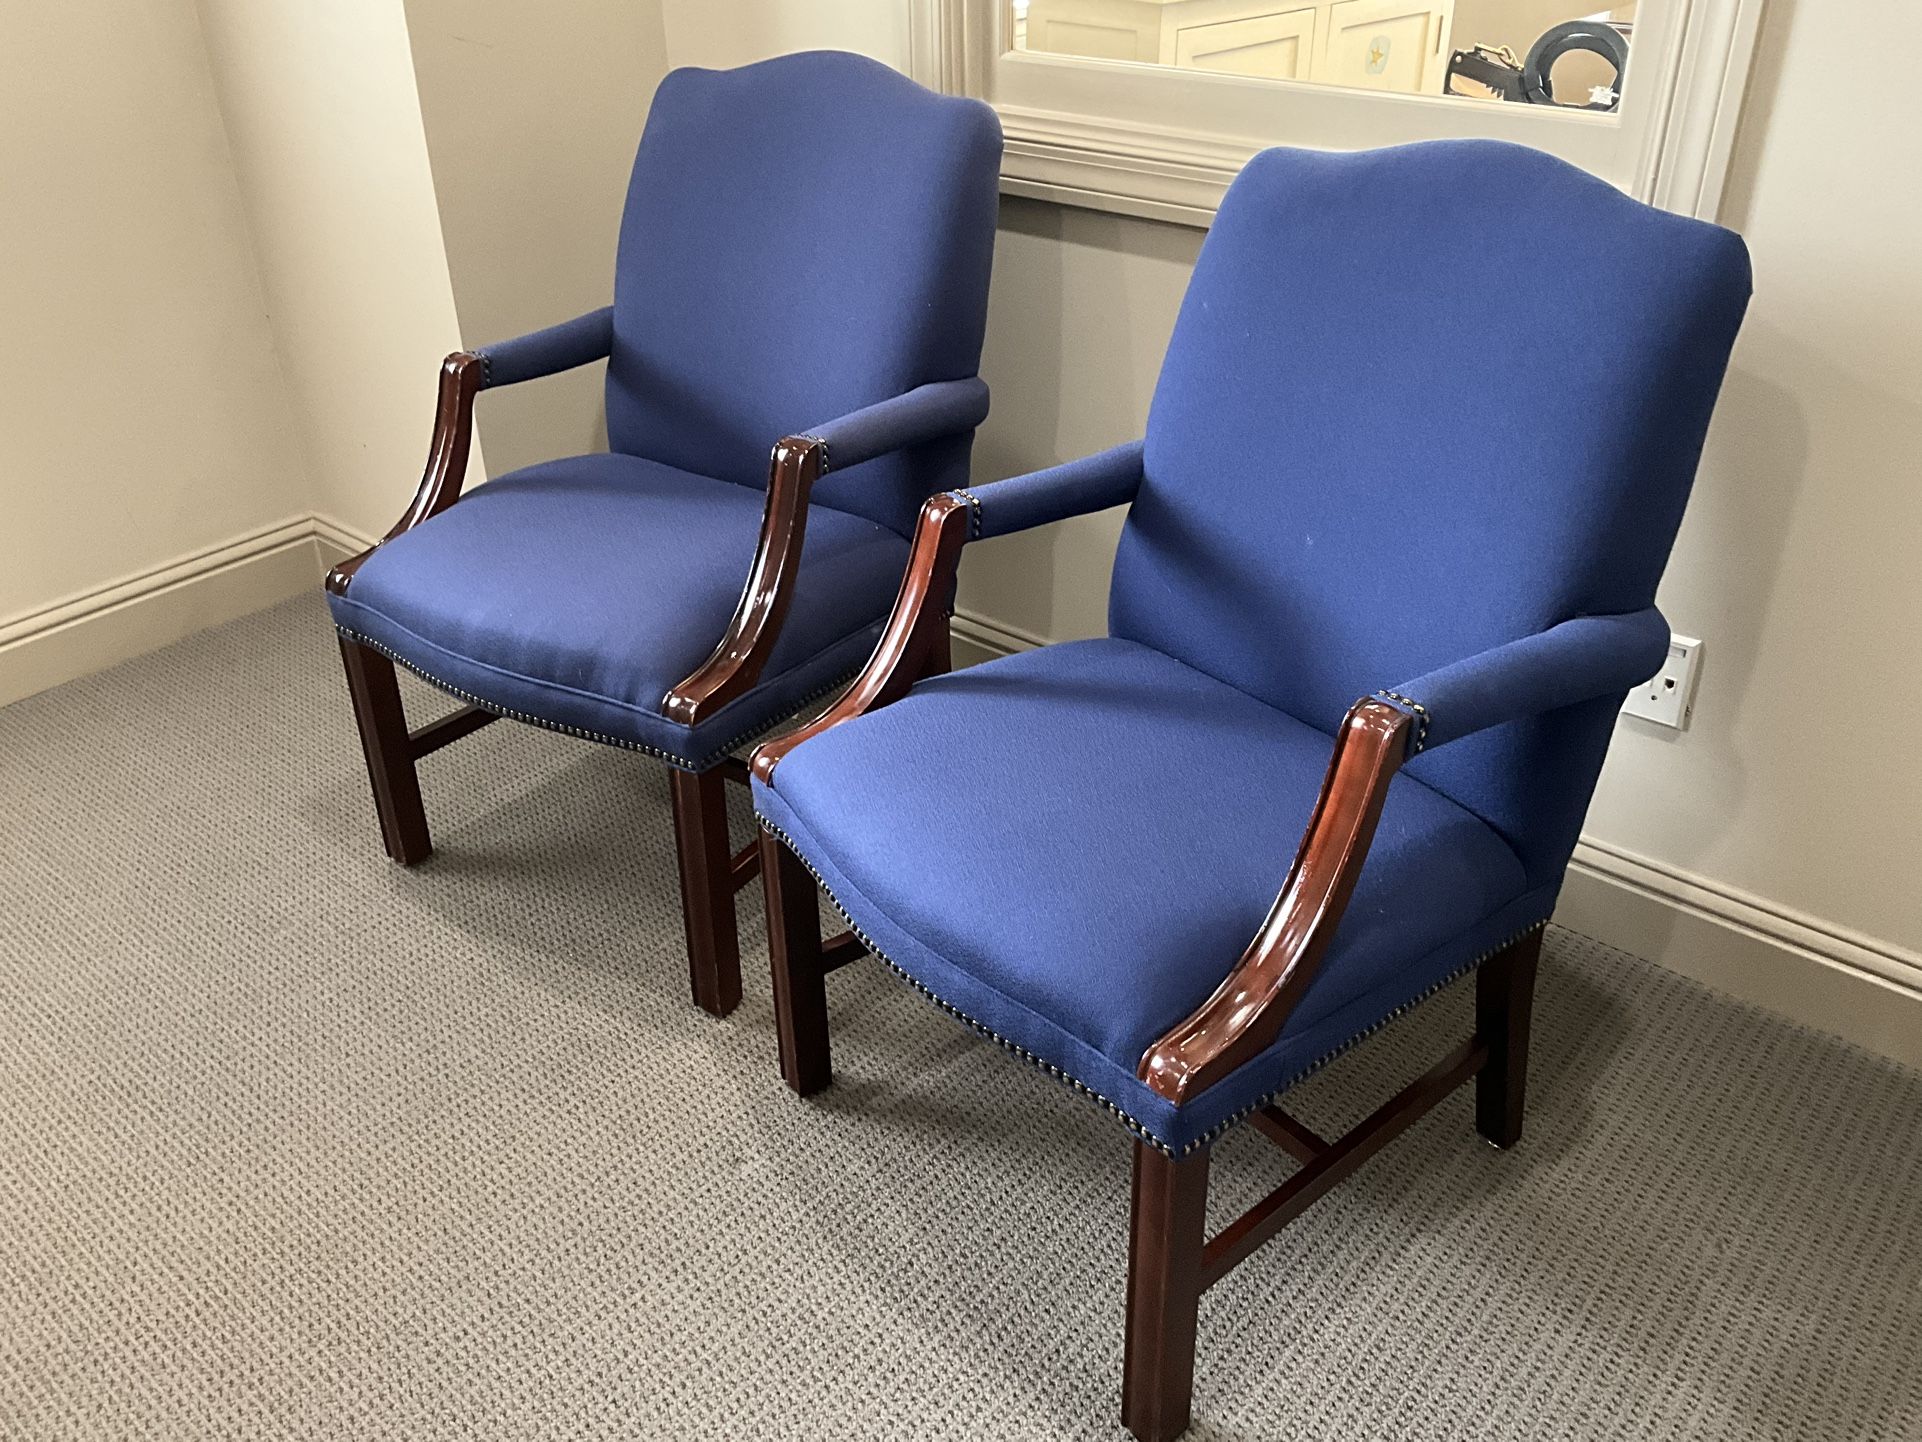 Pair Of Kimball International Reception Guest Chairs